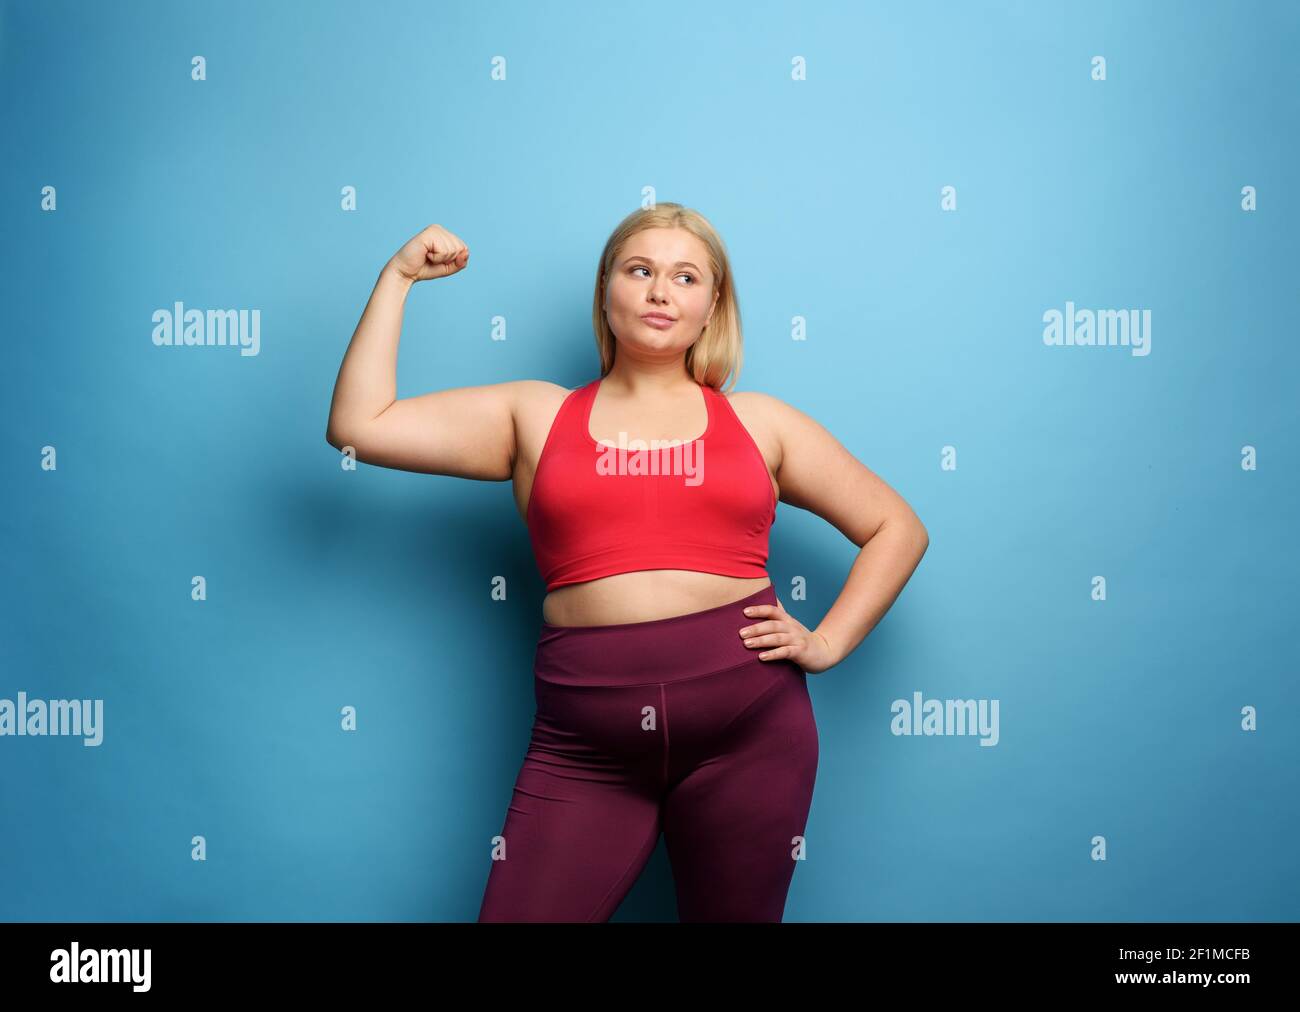 Fat girl does gym at home. thoughtful expression. Cyan background Stock Photo